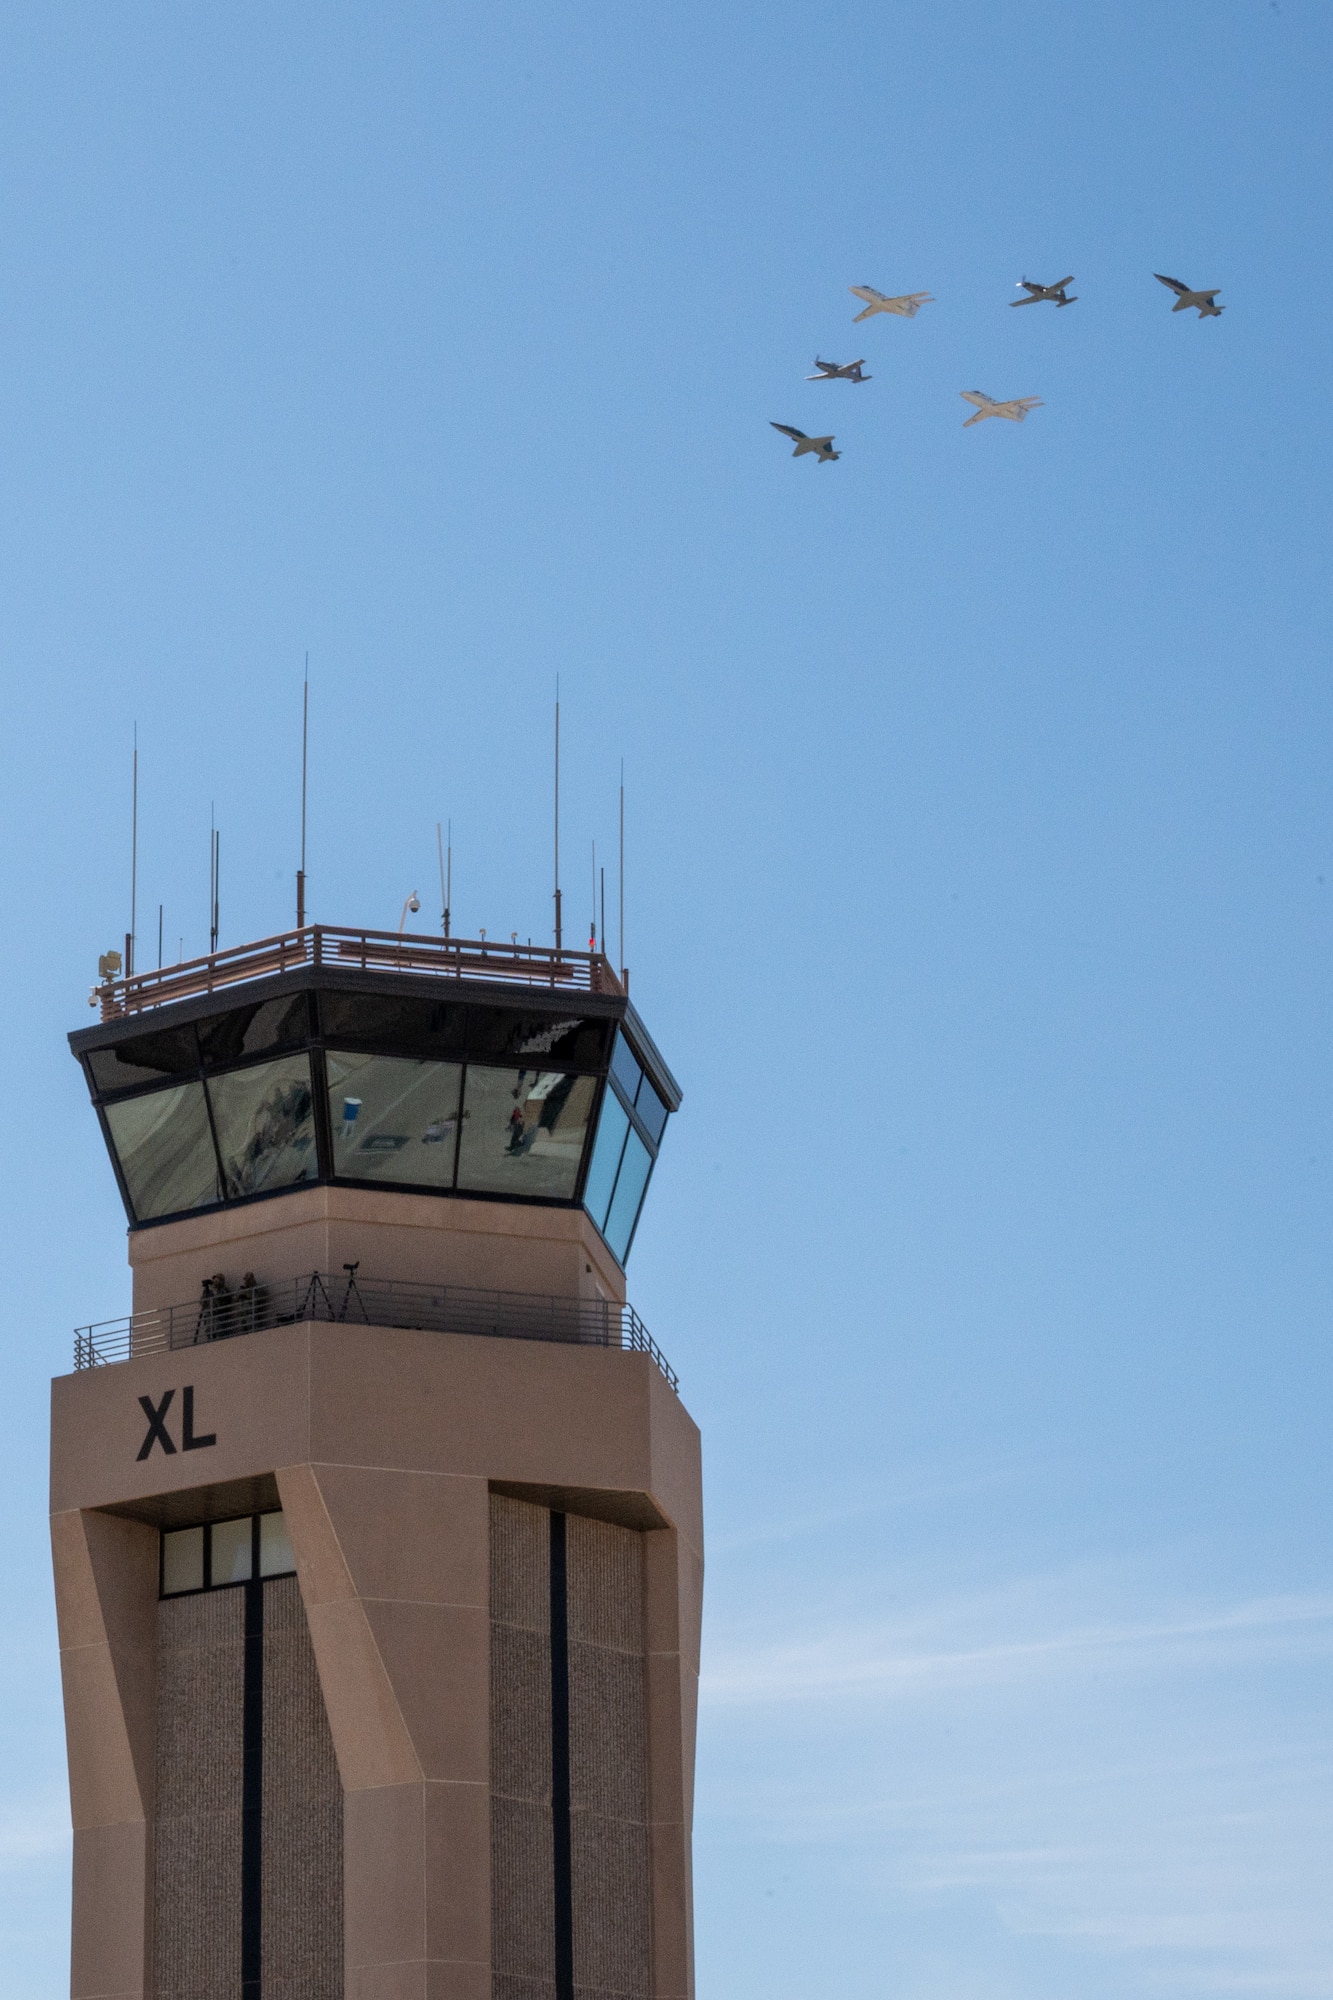 Six U.S. Air Force aircraft perform a flyover near the “XL” air traffic control tower at Laughlin Air Force Base, Texas, March 9, 2024. The formation included two T-1A Jayhawks, two T-6A Texan II’s and two T-38C Talons. The flyover was performed during the Fiesta of Flight airshow at show center following the national anthem. (U.S. Air Force photo by Staff Sgt. Nicholas Larsen)